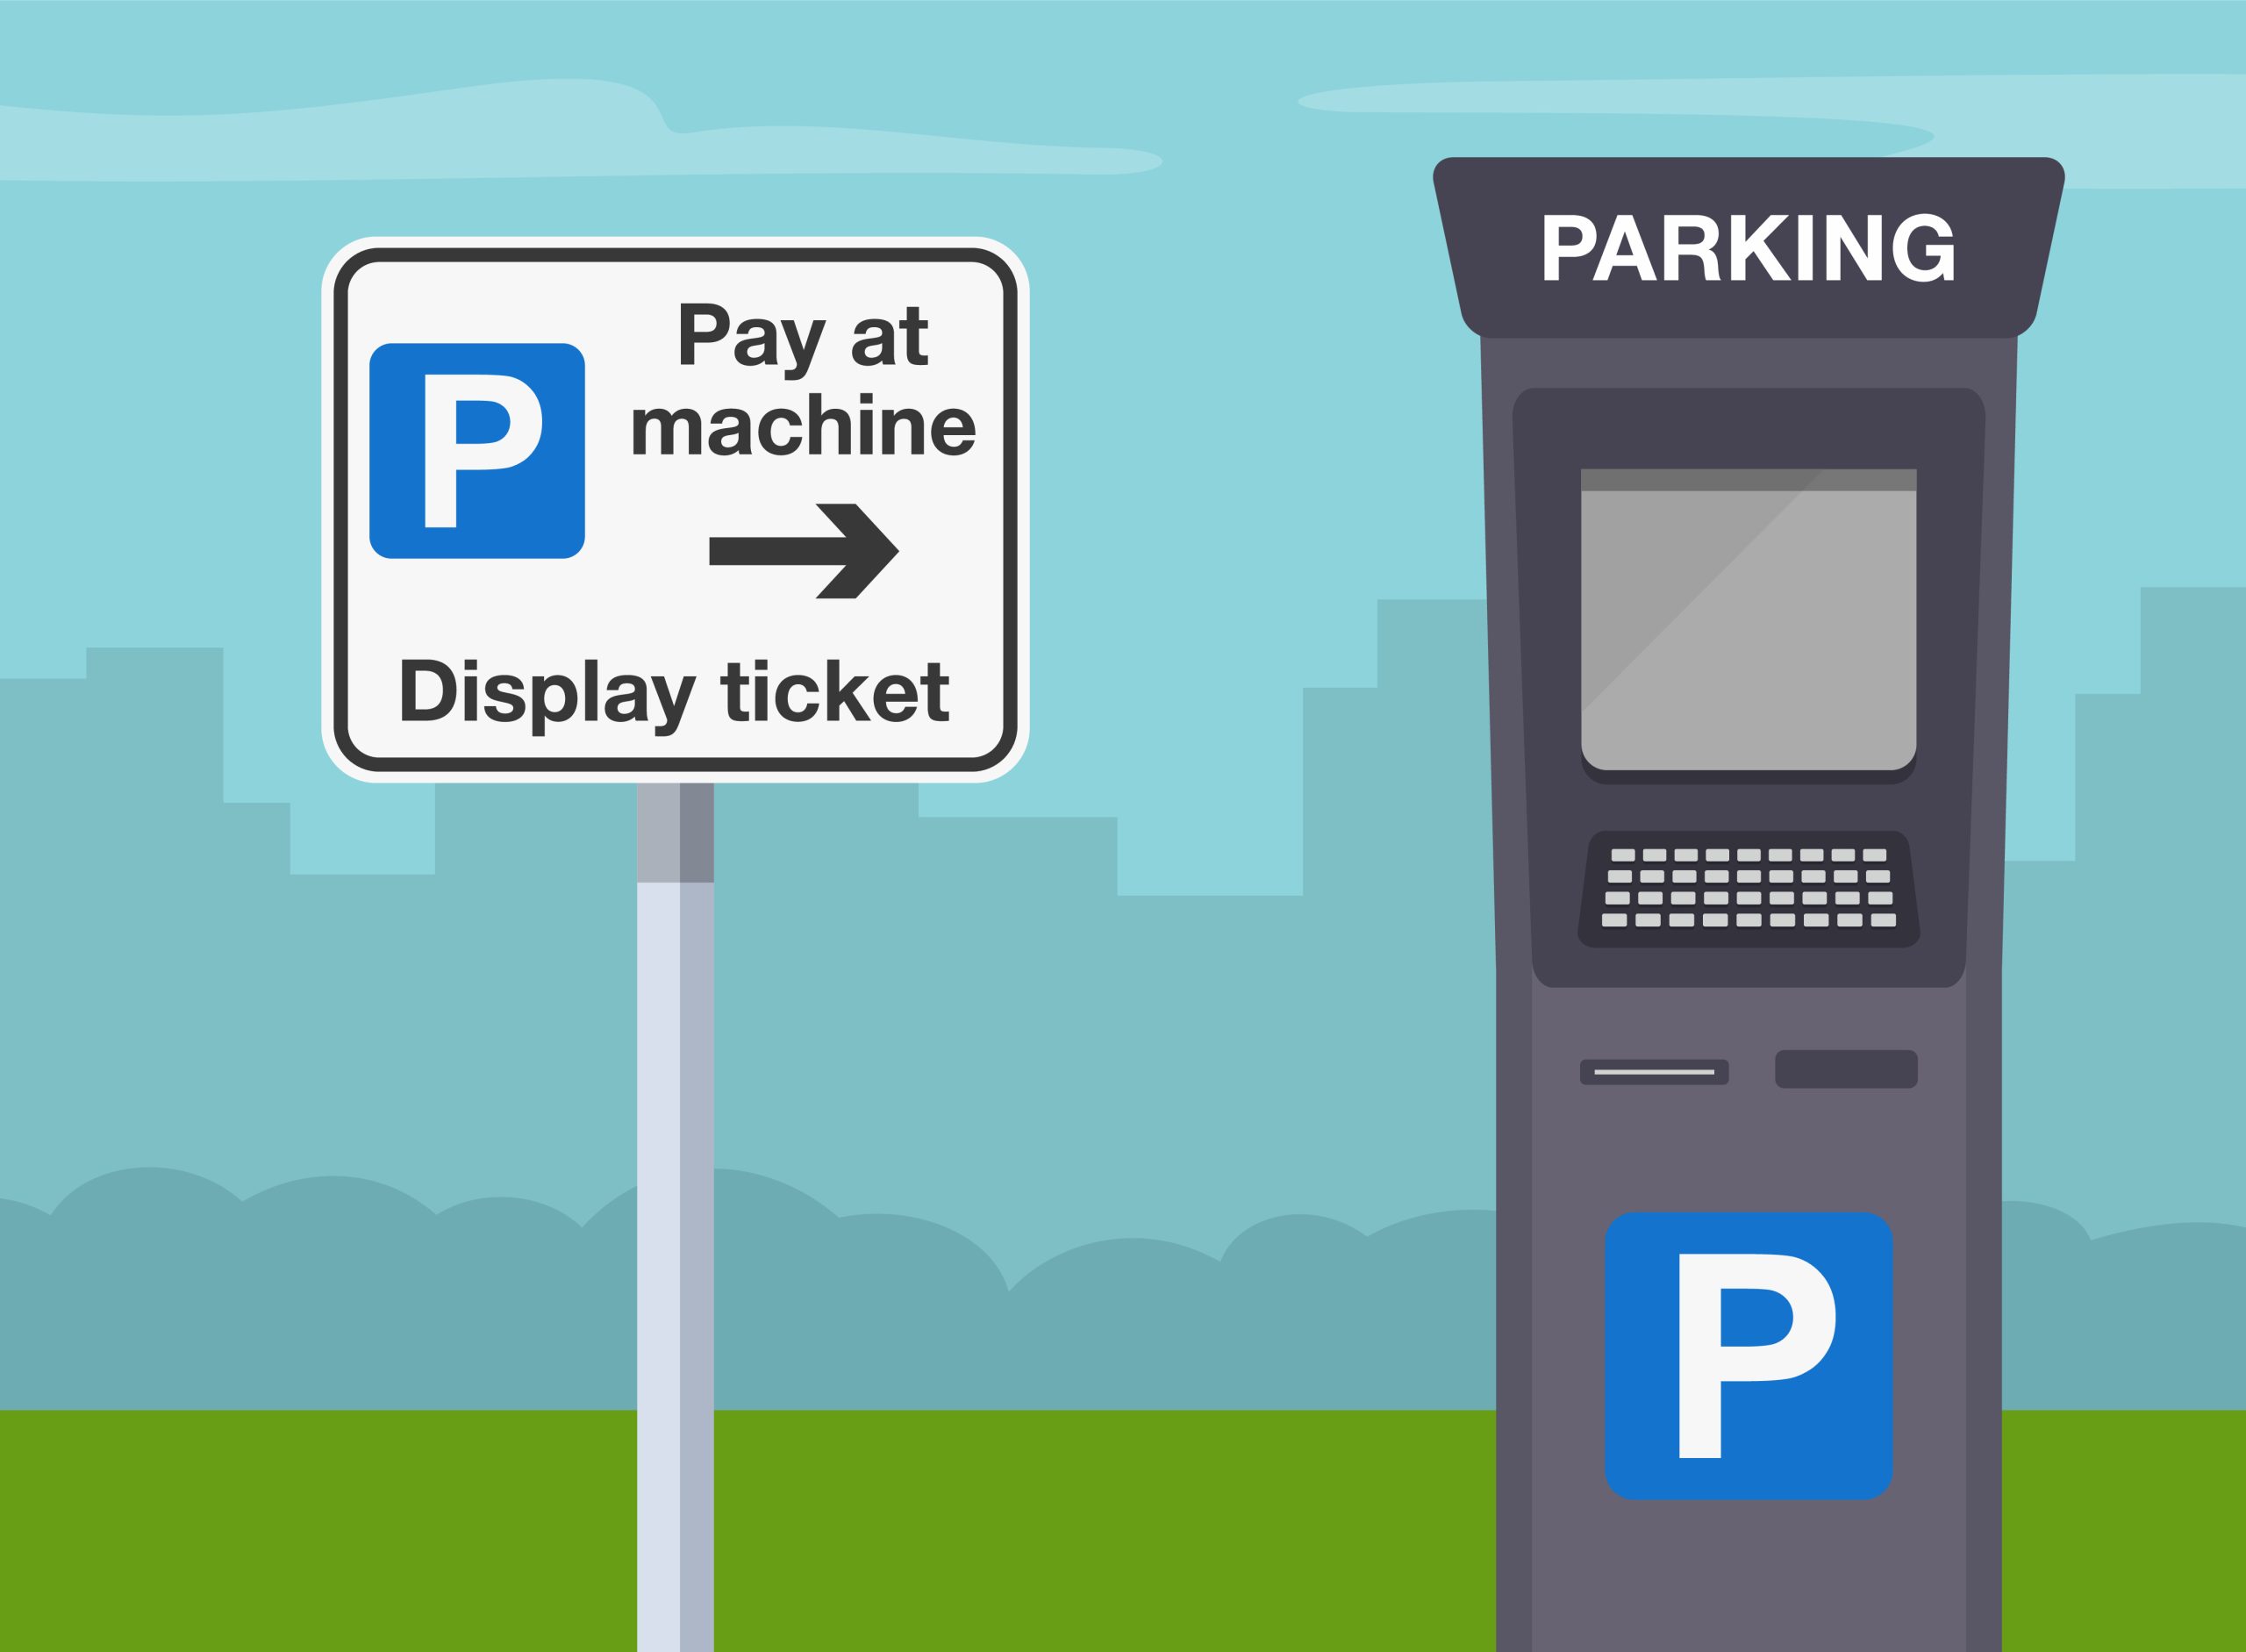 DRIVE Driving School pay and display parking